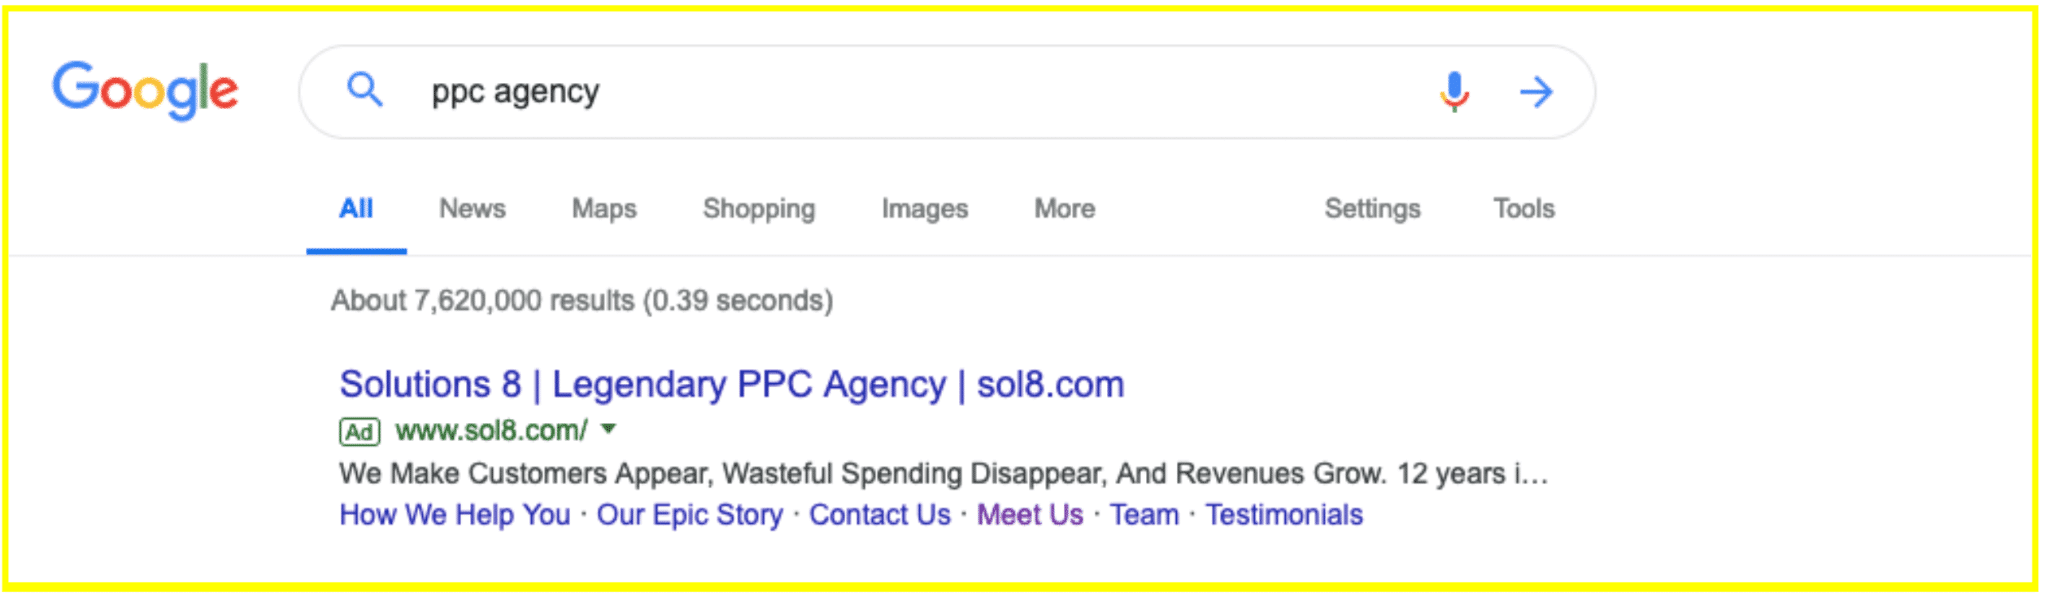 Google Search Ads for PPC Agency